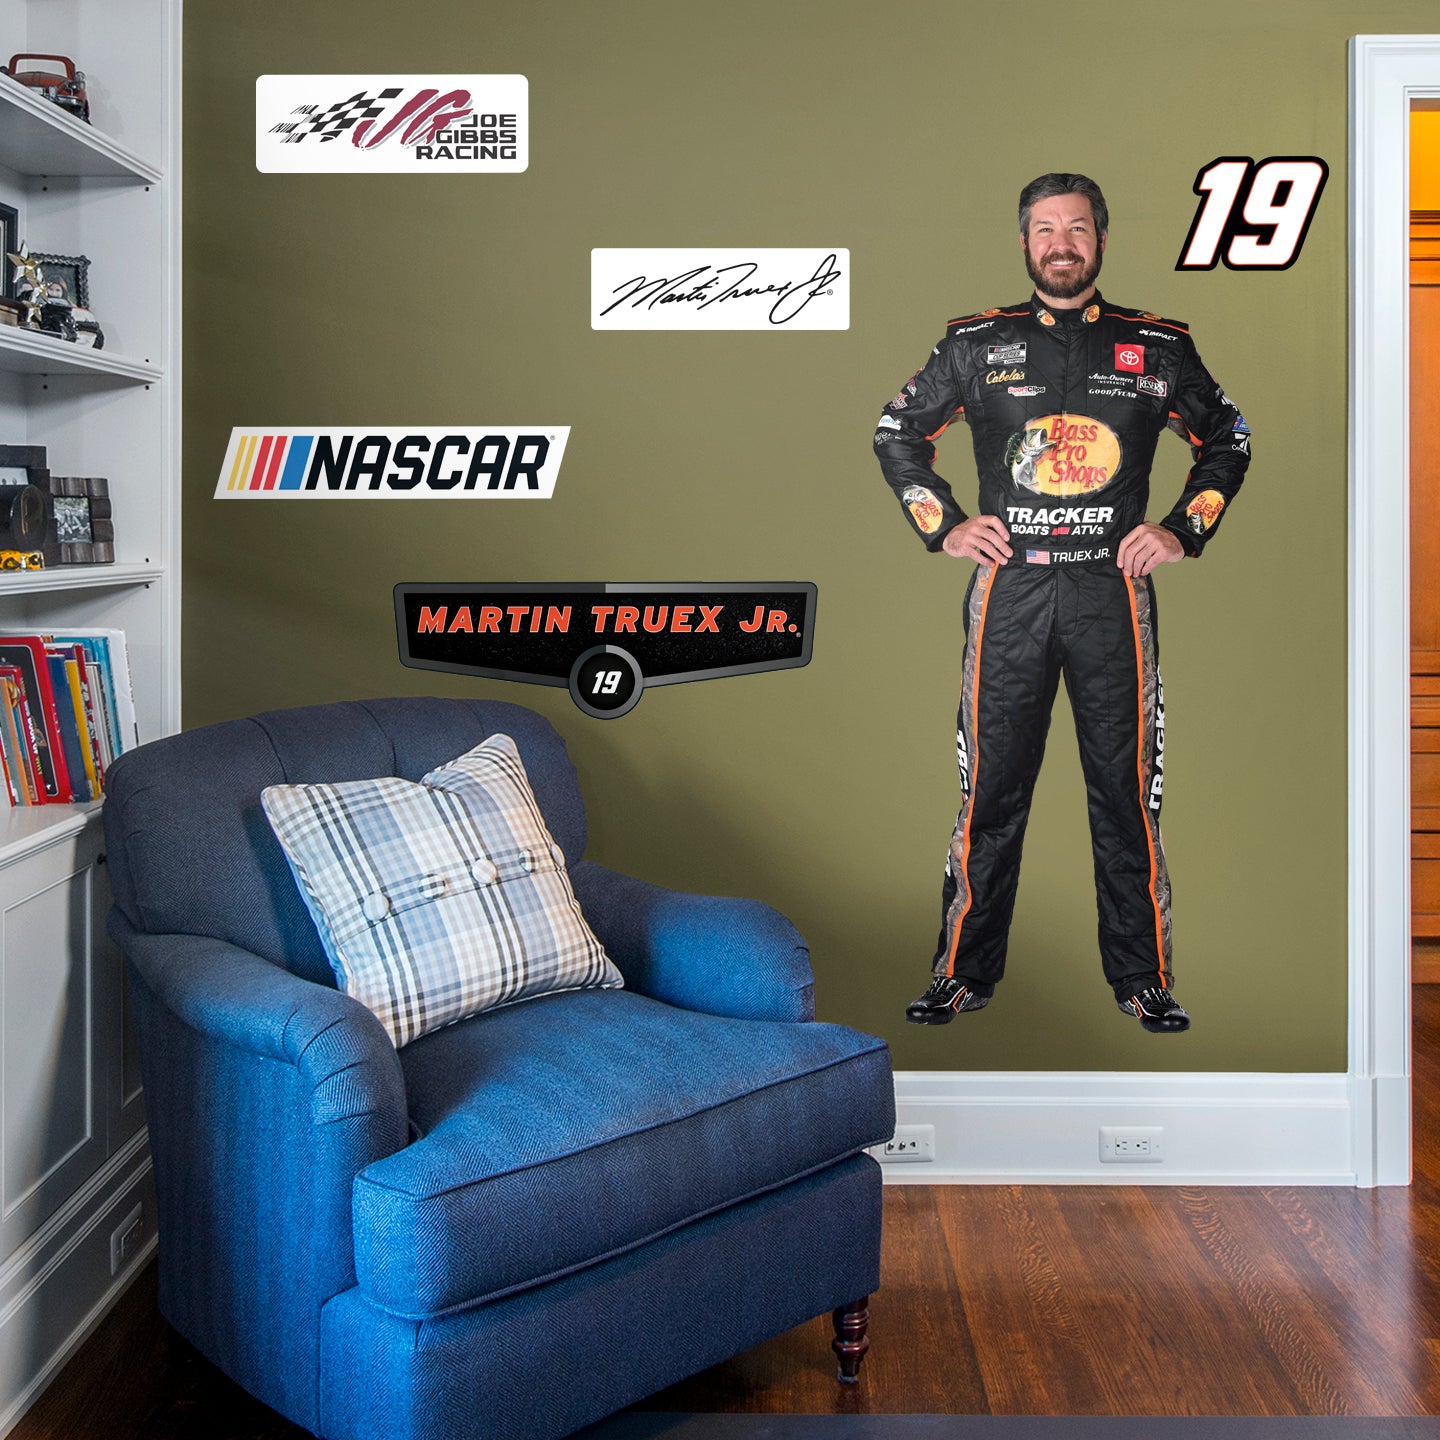 Martin Truex Jr. 2021 Driver - Officially Licensed NASCAR Removable Wall Decal Life-Size Character + 6 Decals (31"W x 70"H) by F